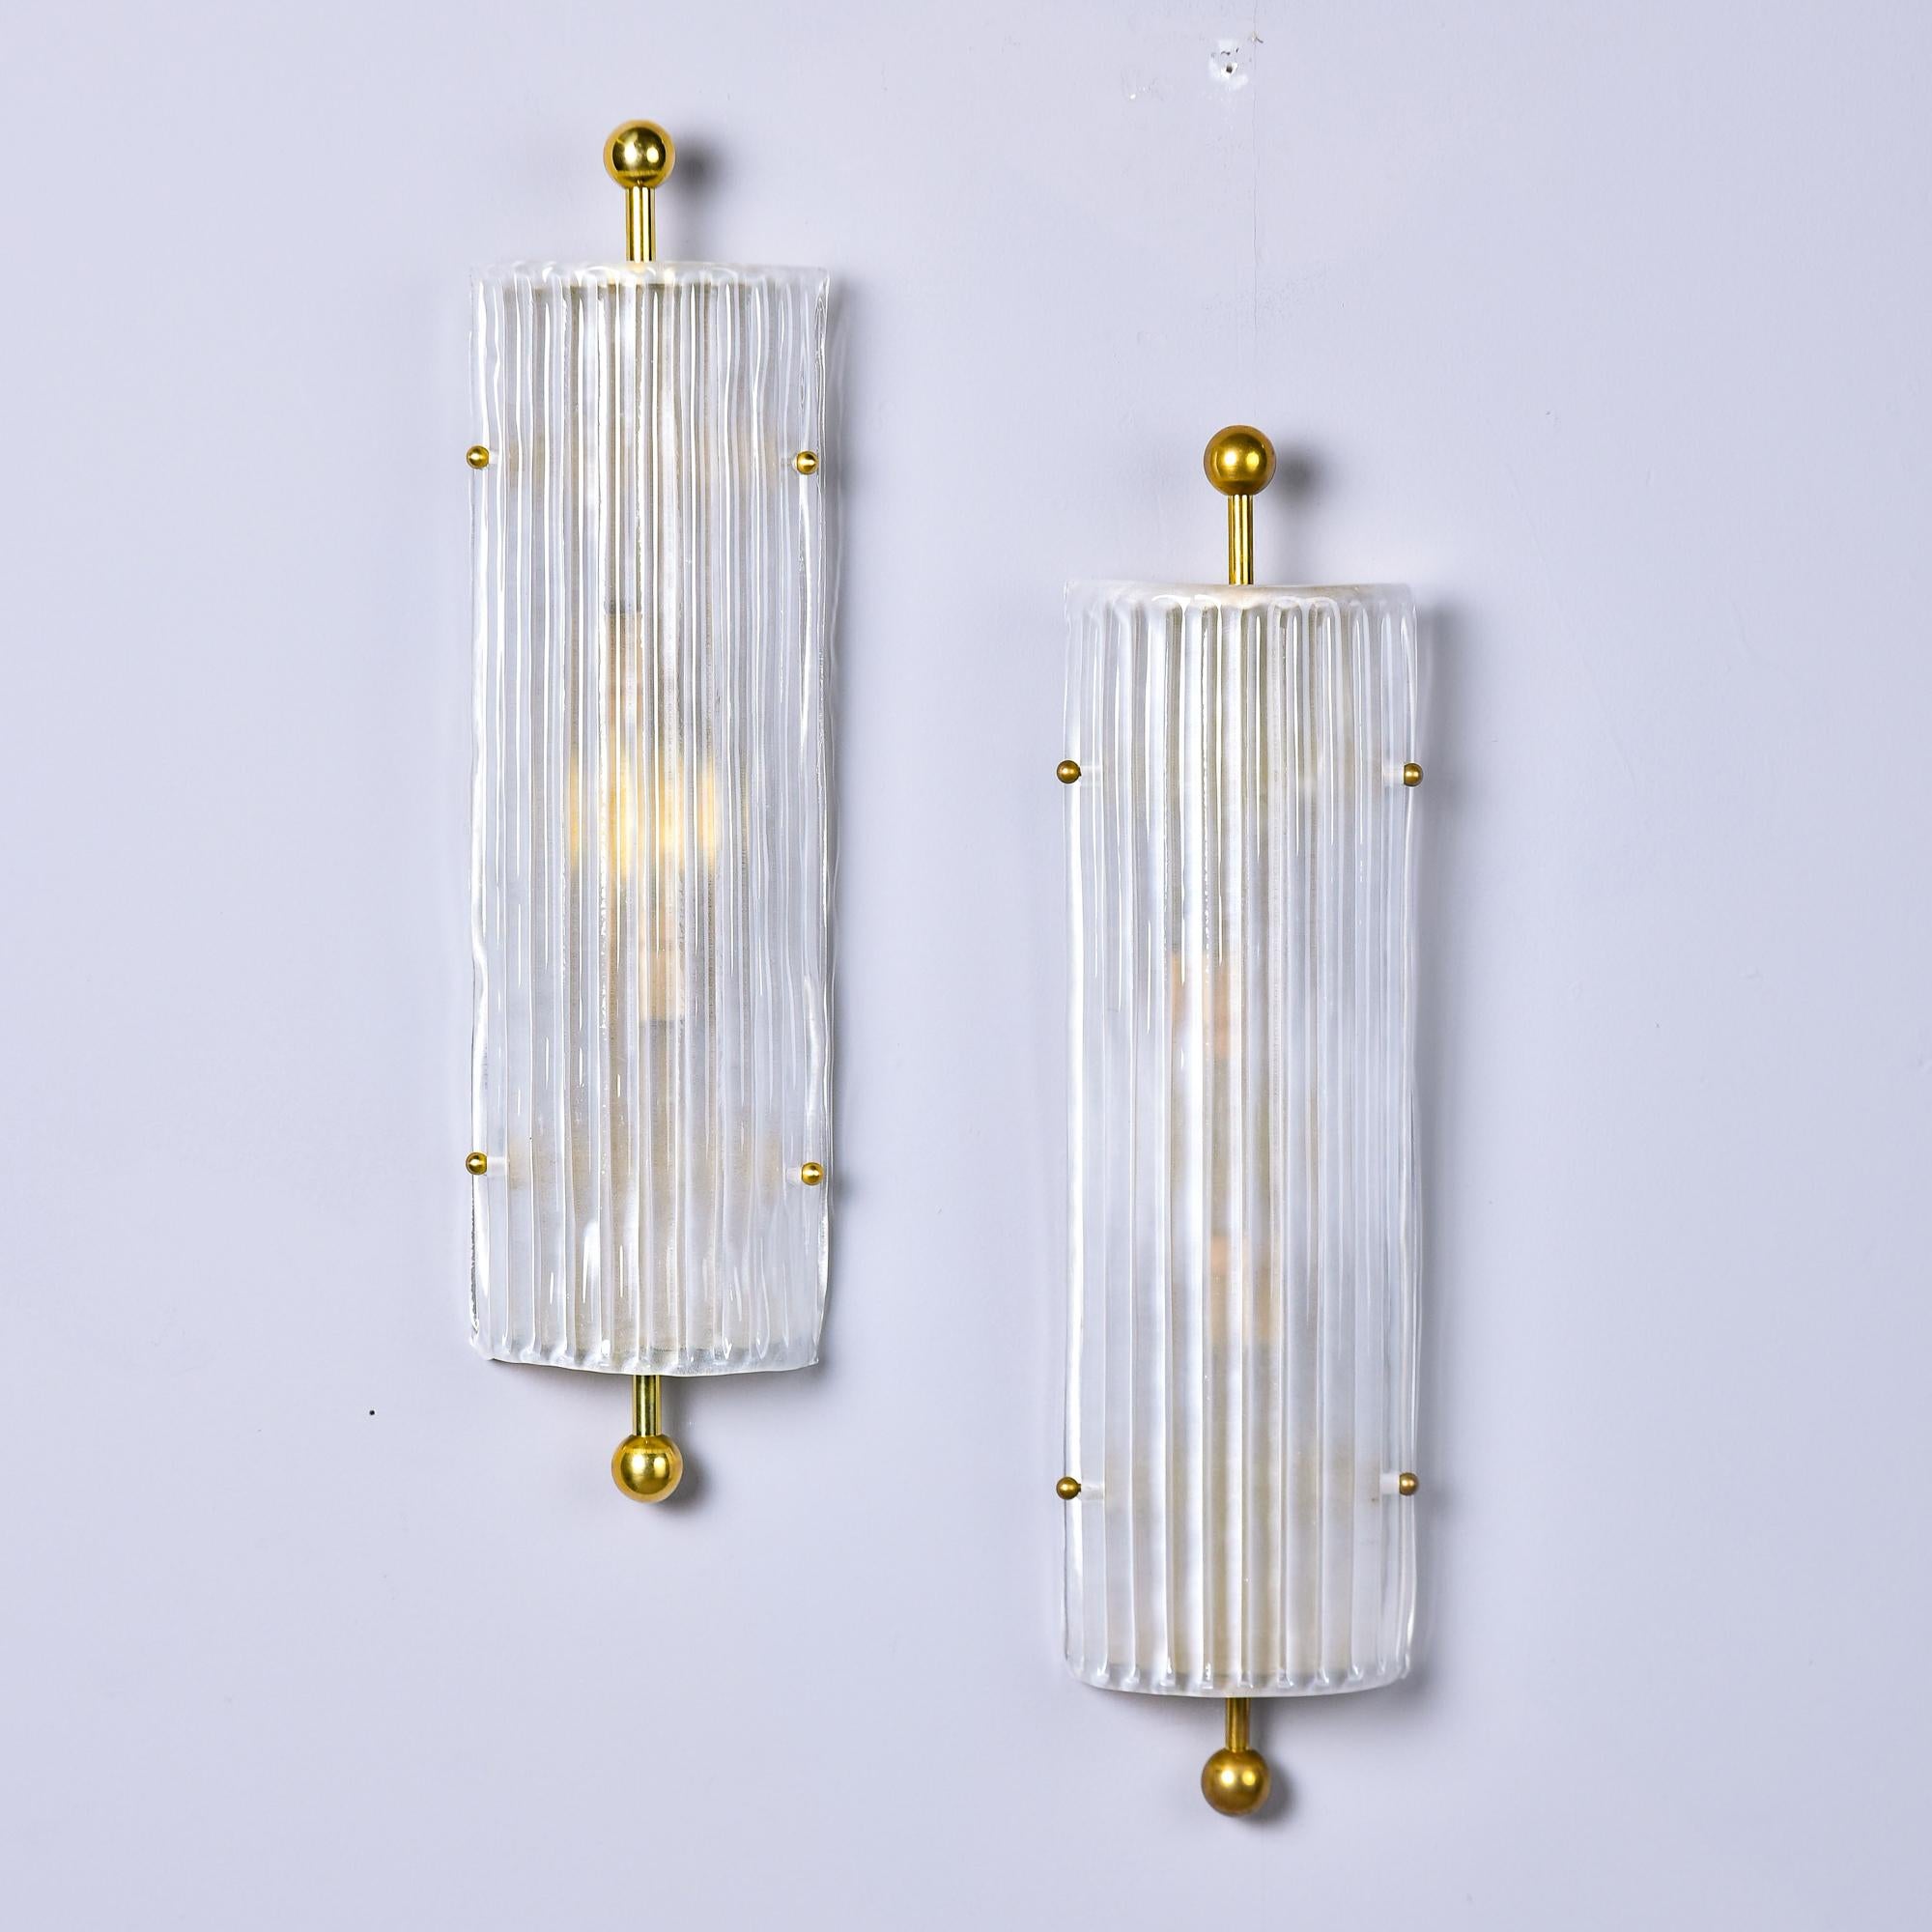 New and made in Italy, these sconces are made of heavy, clear ribbed-texture Murano glass with polished brass hardware. They are just over 22” high and can be mounted vertically or horizontally. Each sconce has two candelabra sized sockets. Sold and